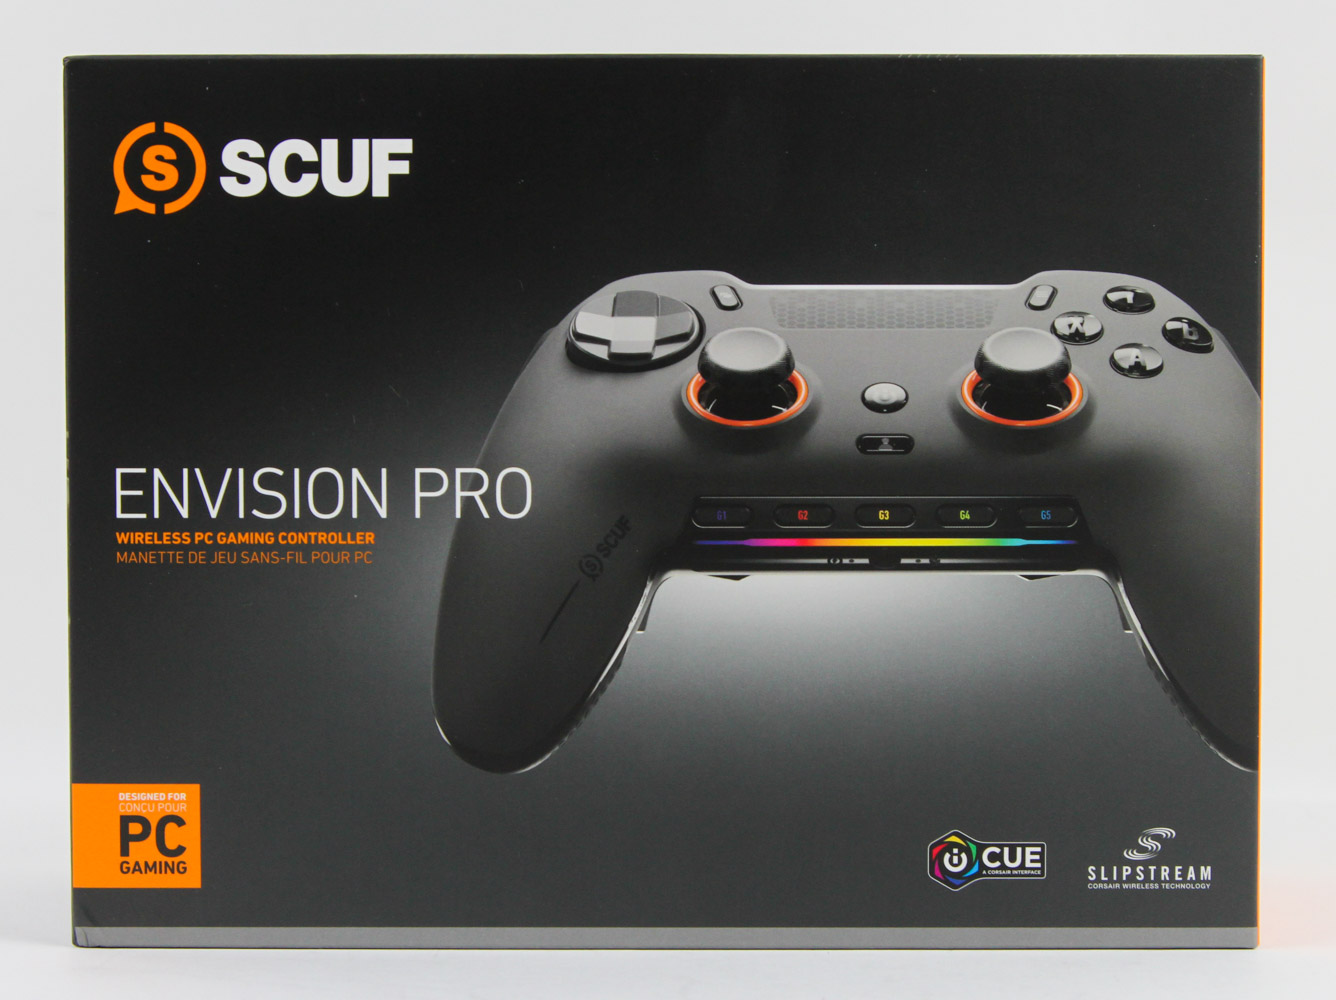 SCUF Envision Pro PC Gaming Controller Review - Packaging 